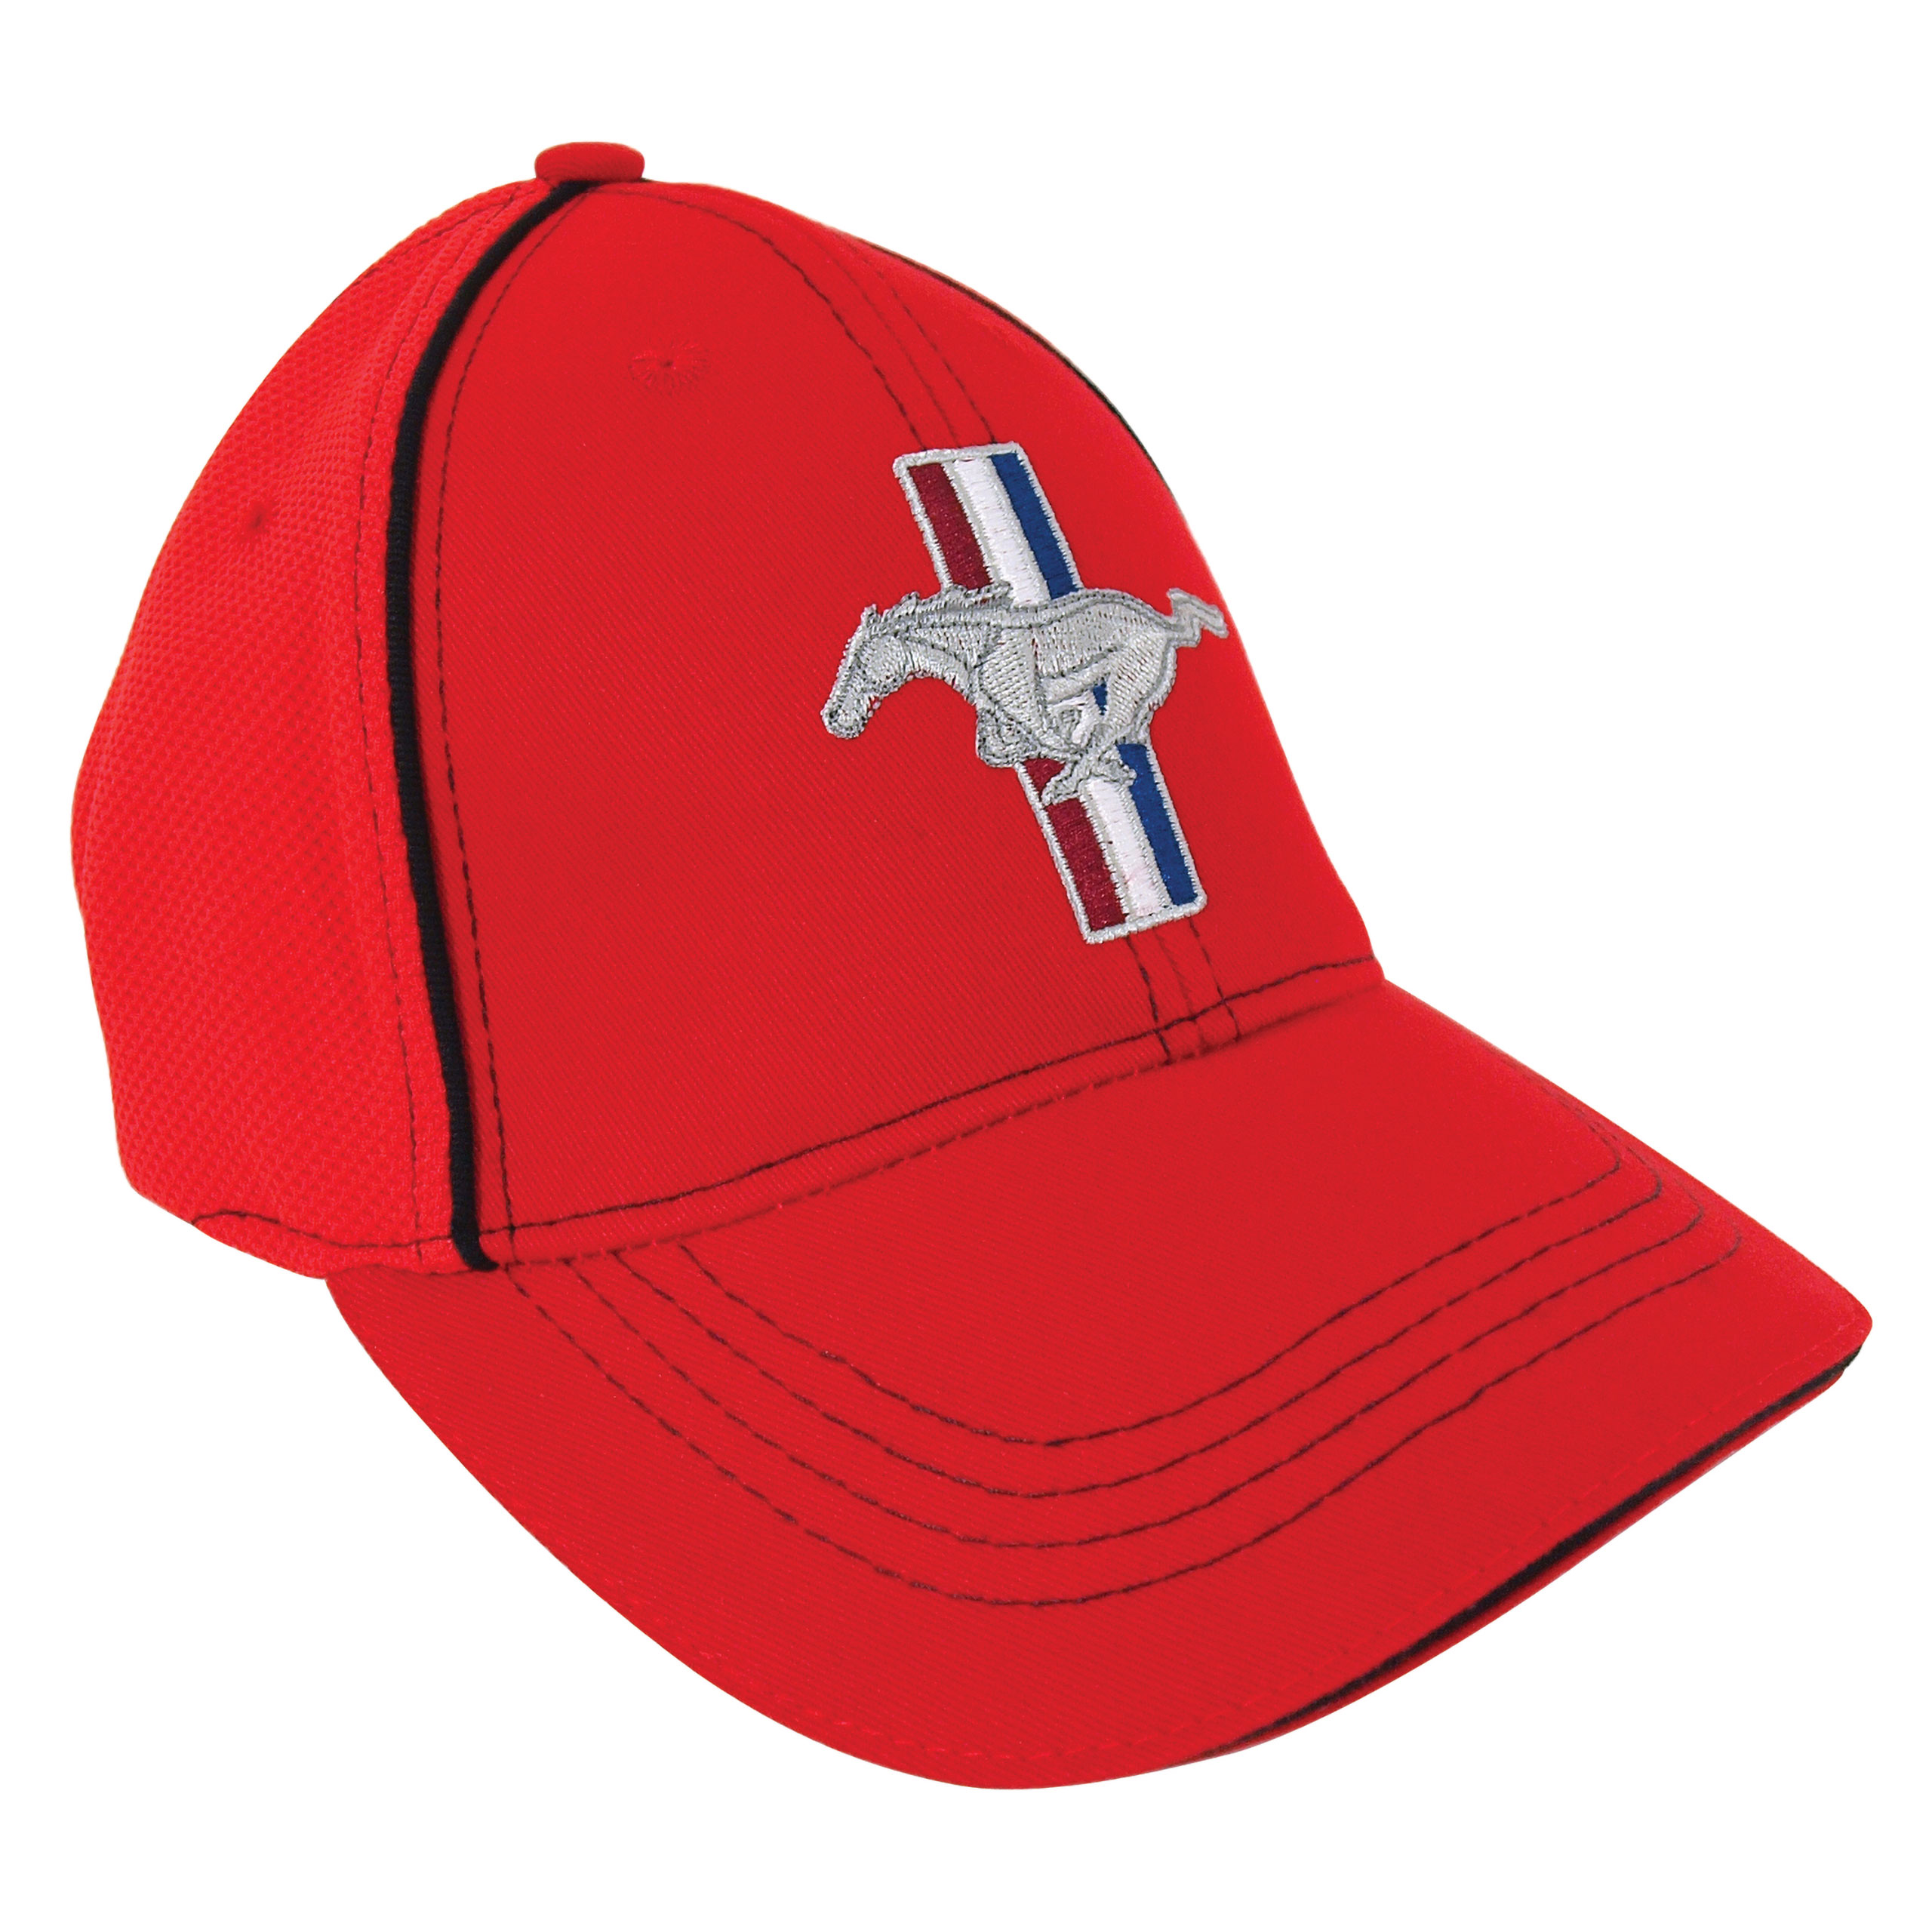 1964-2021 Ford Mustang Cap - Mustang Red Flexible Fabric W/Pony Logo LG/XL  - Auto Accessories of America